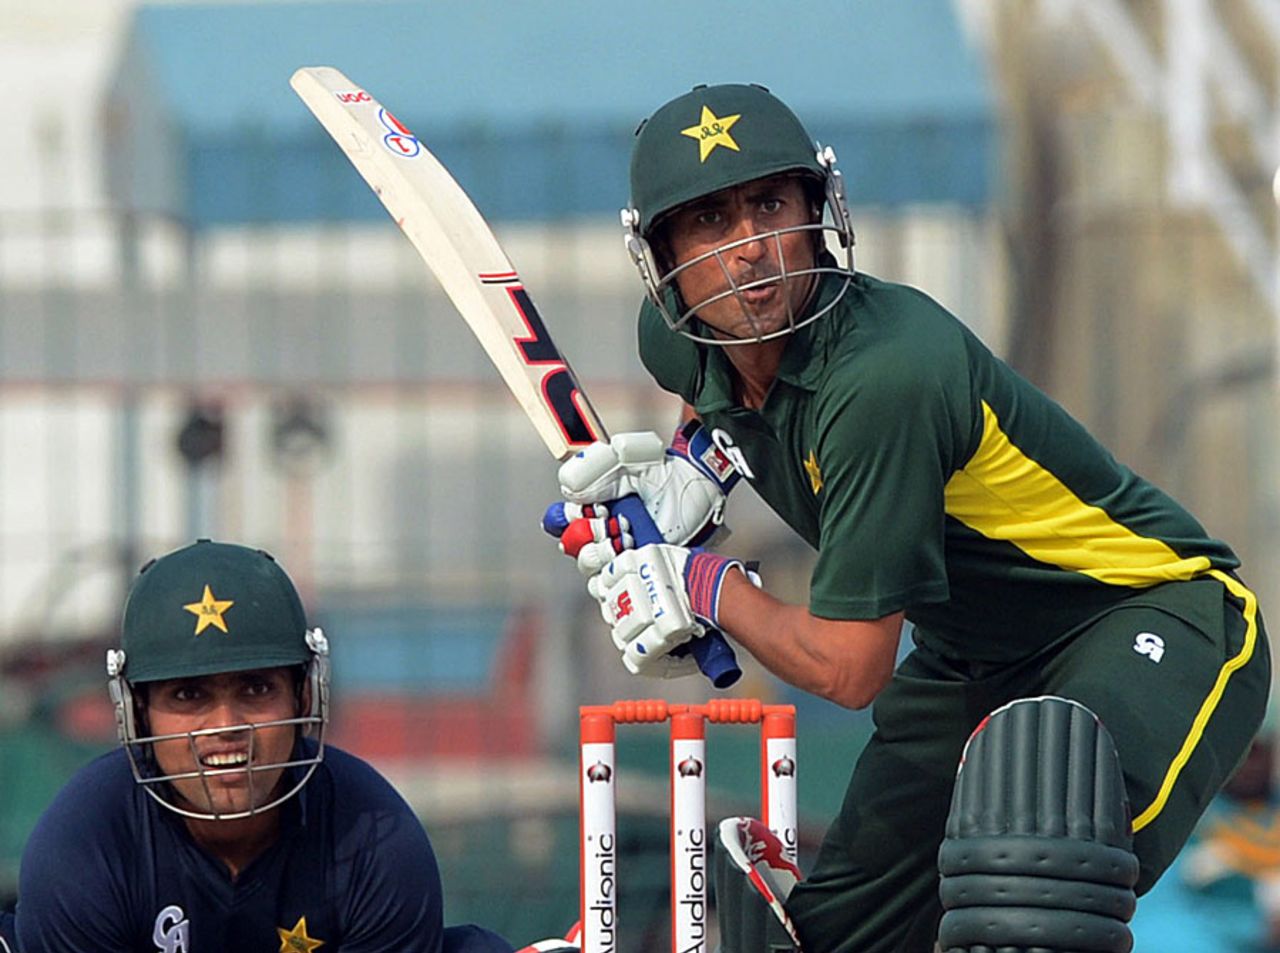 Younis Khan prepares to face a delivery at practice, Lahore, December 17, 2012